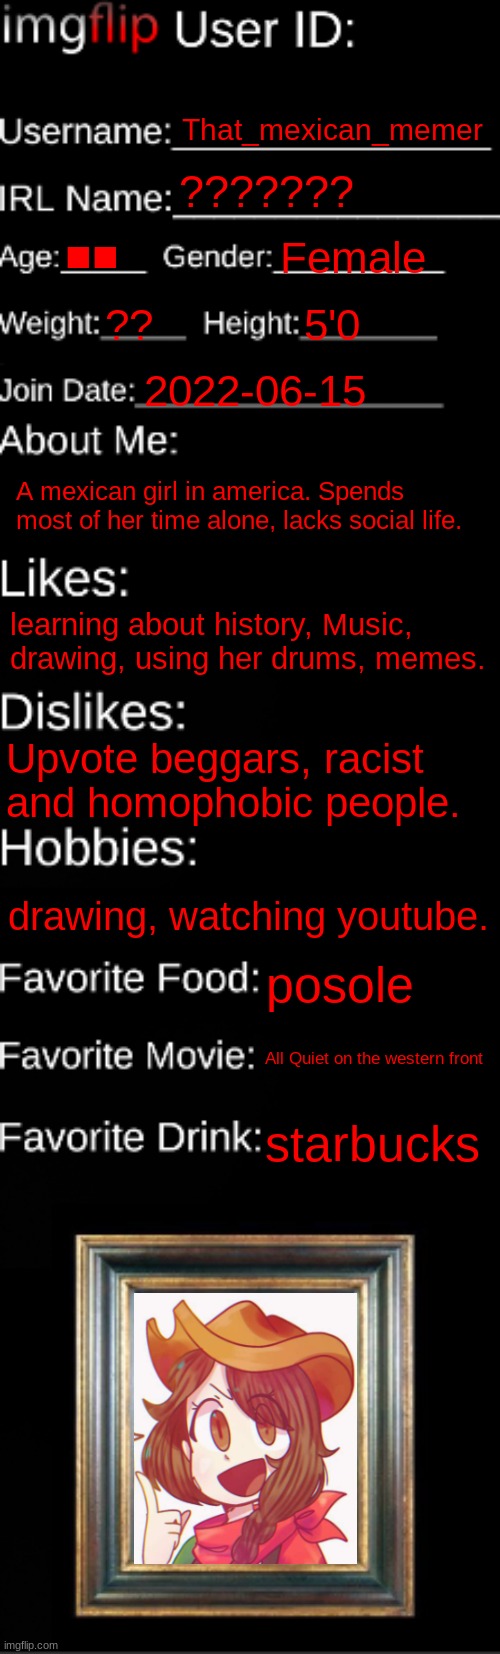 Imgflip id card | That_mexican_memer; ??????? ■■; Female; ?? 5'0; 2022-06-15; A mexican girl in america. Spends most of her time alone, lacks social life. learning about history, Music, drawing, using her drums, memes. Upvote beggars, racist and homophobic people. drawing, watching youtube. posole; All Quiet on the western front; starbucks | image tagged in imgflip id card | made w/ Imgflip meme maker